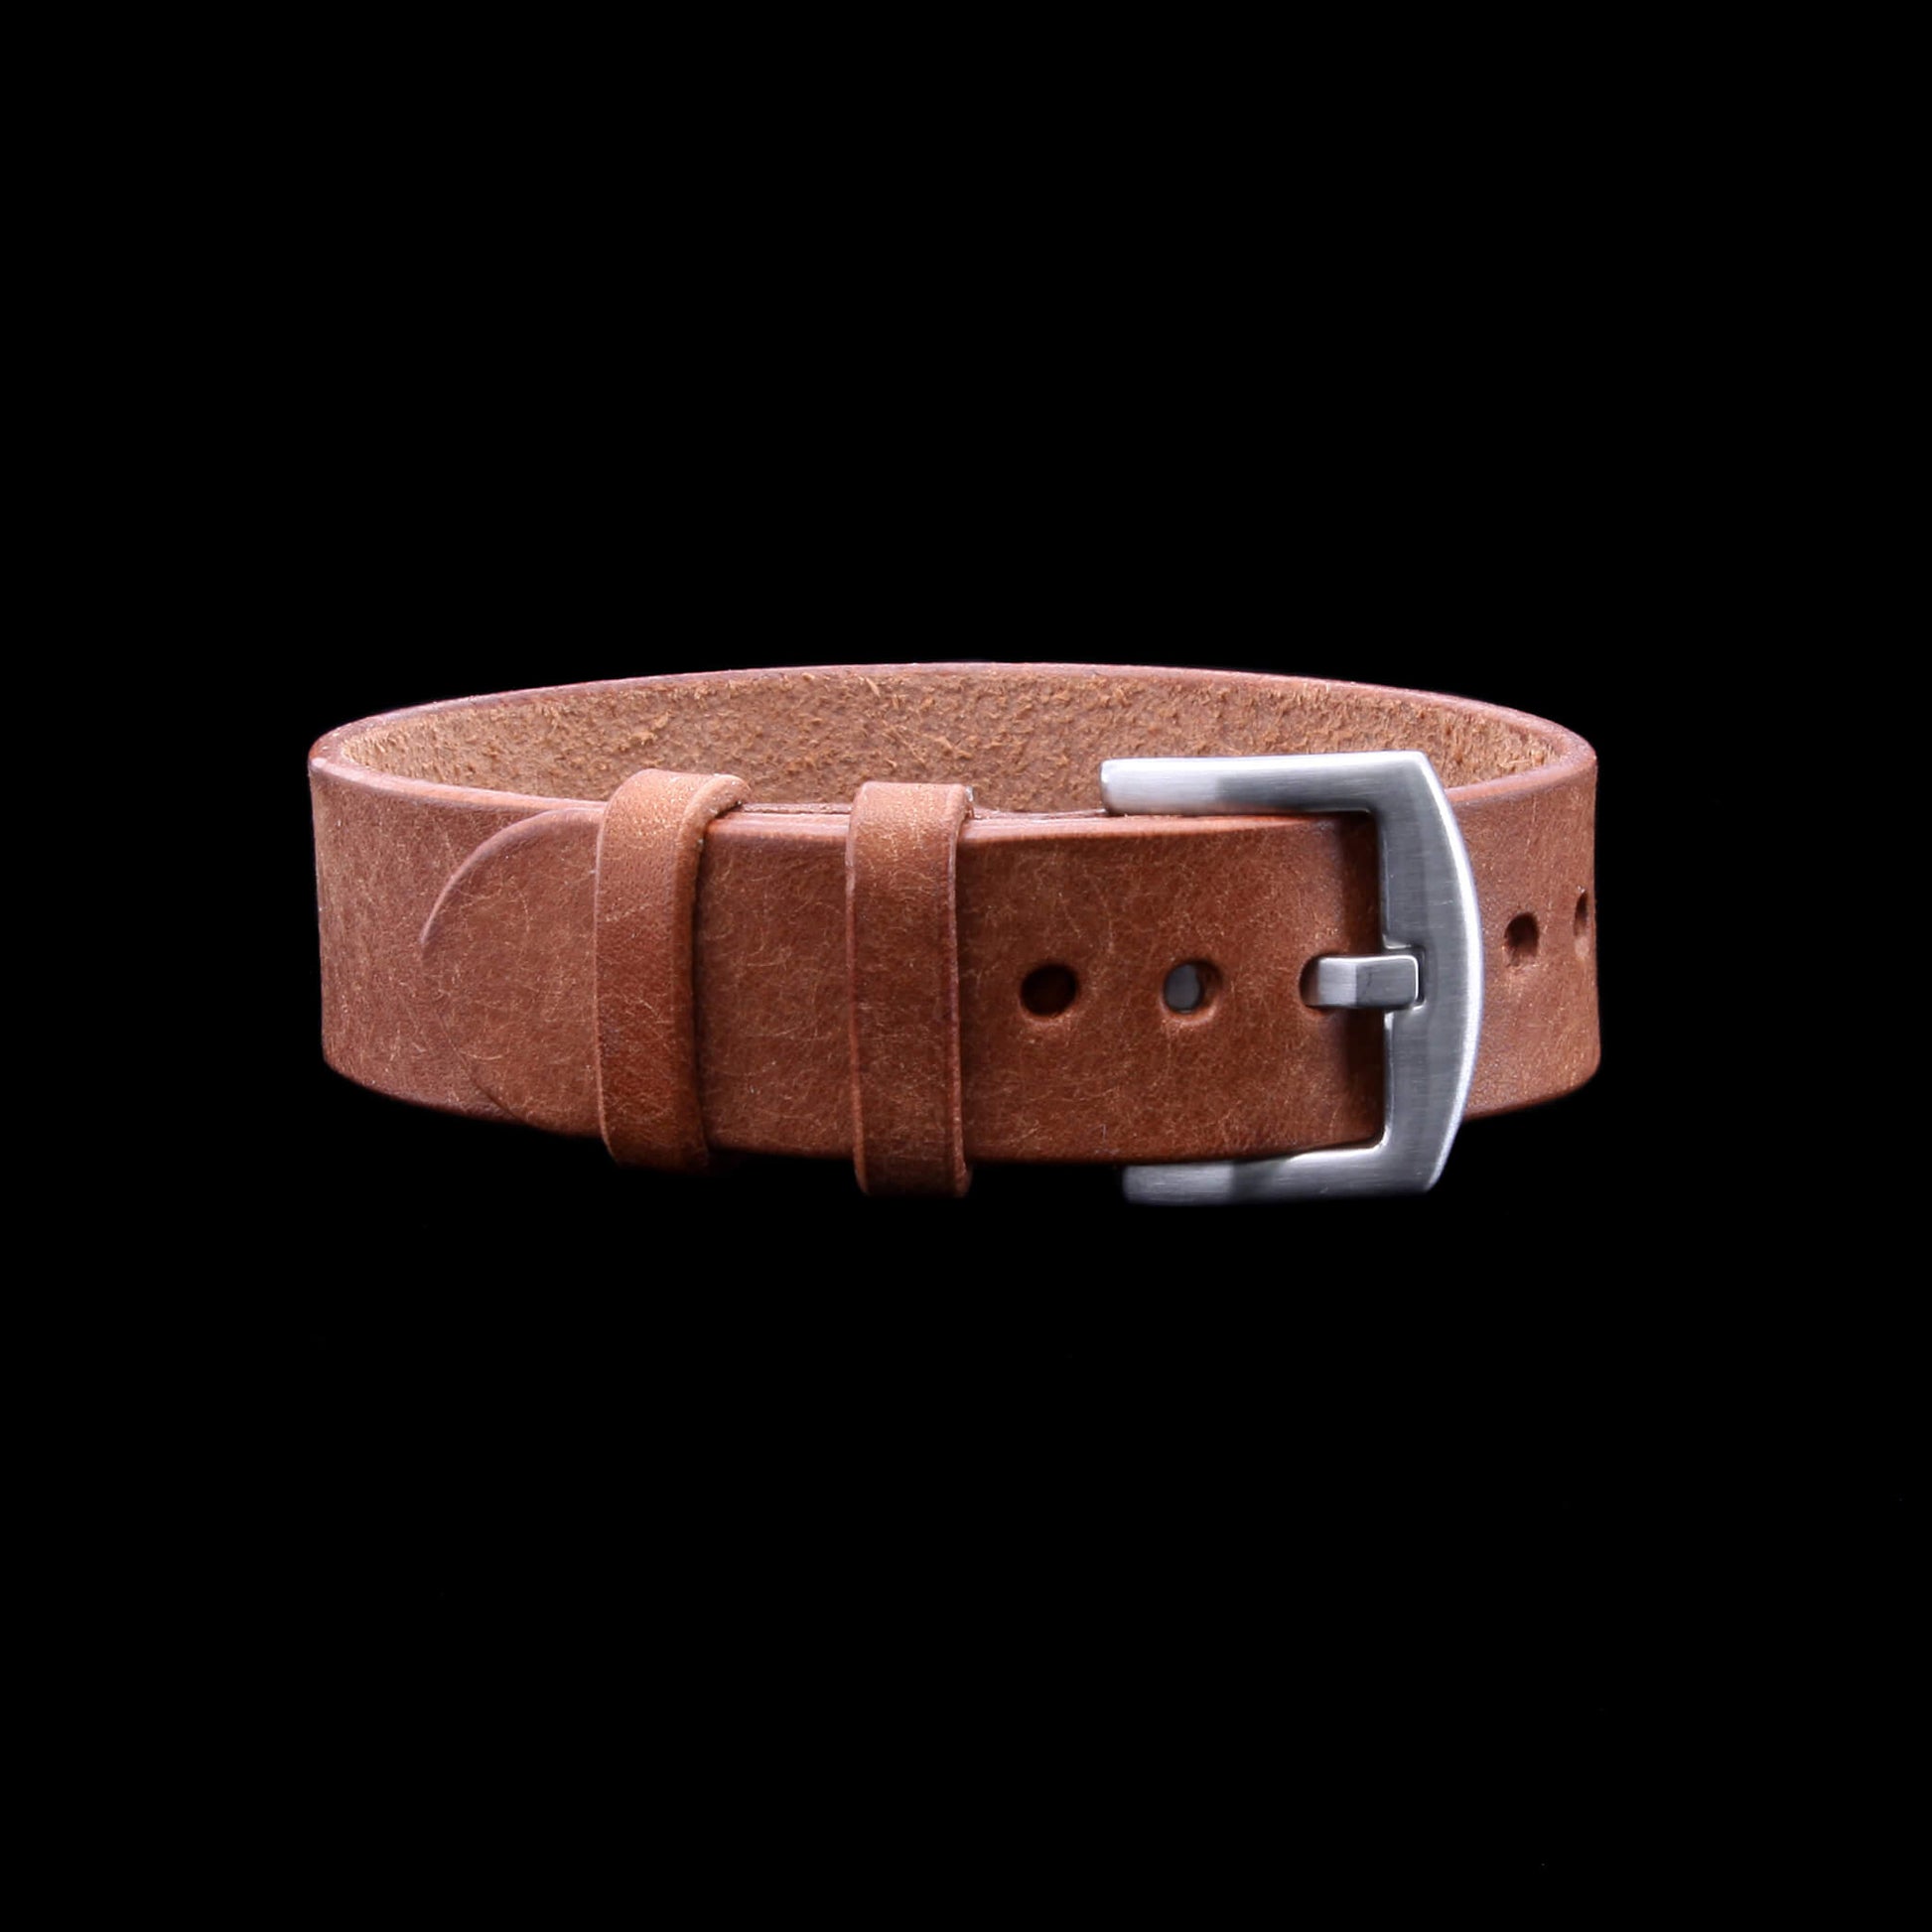 Single Pass Leather Watch Strap, 2-Keeper Rustic Russet | Full Grain Italian Vegetable-Tanned Leather | Cozy Handmade